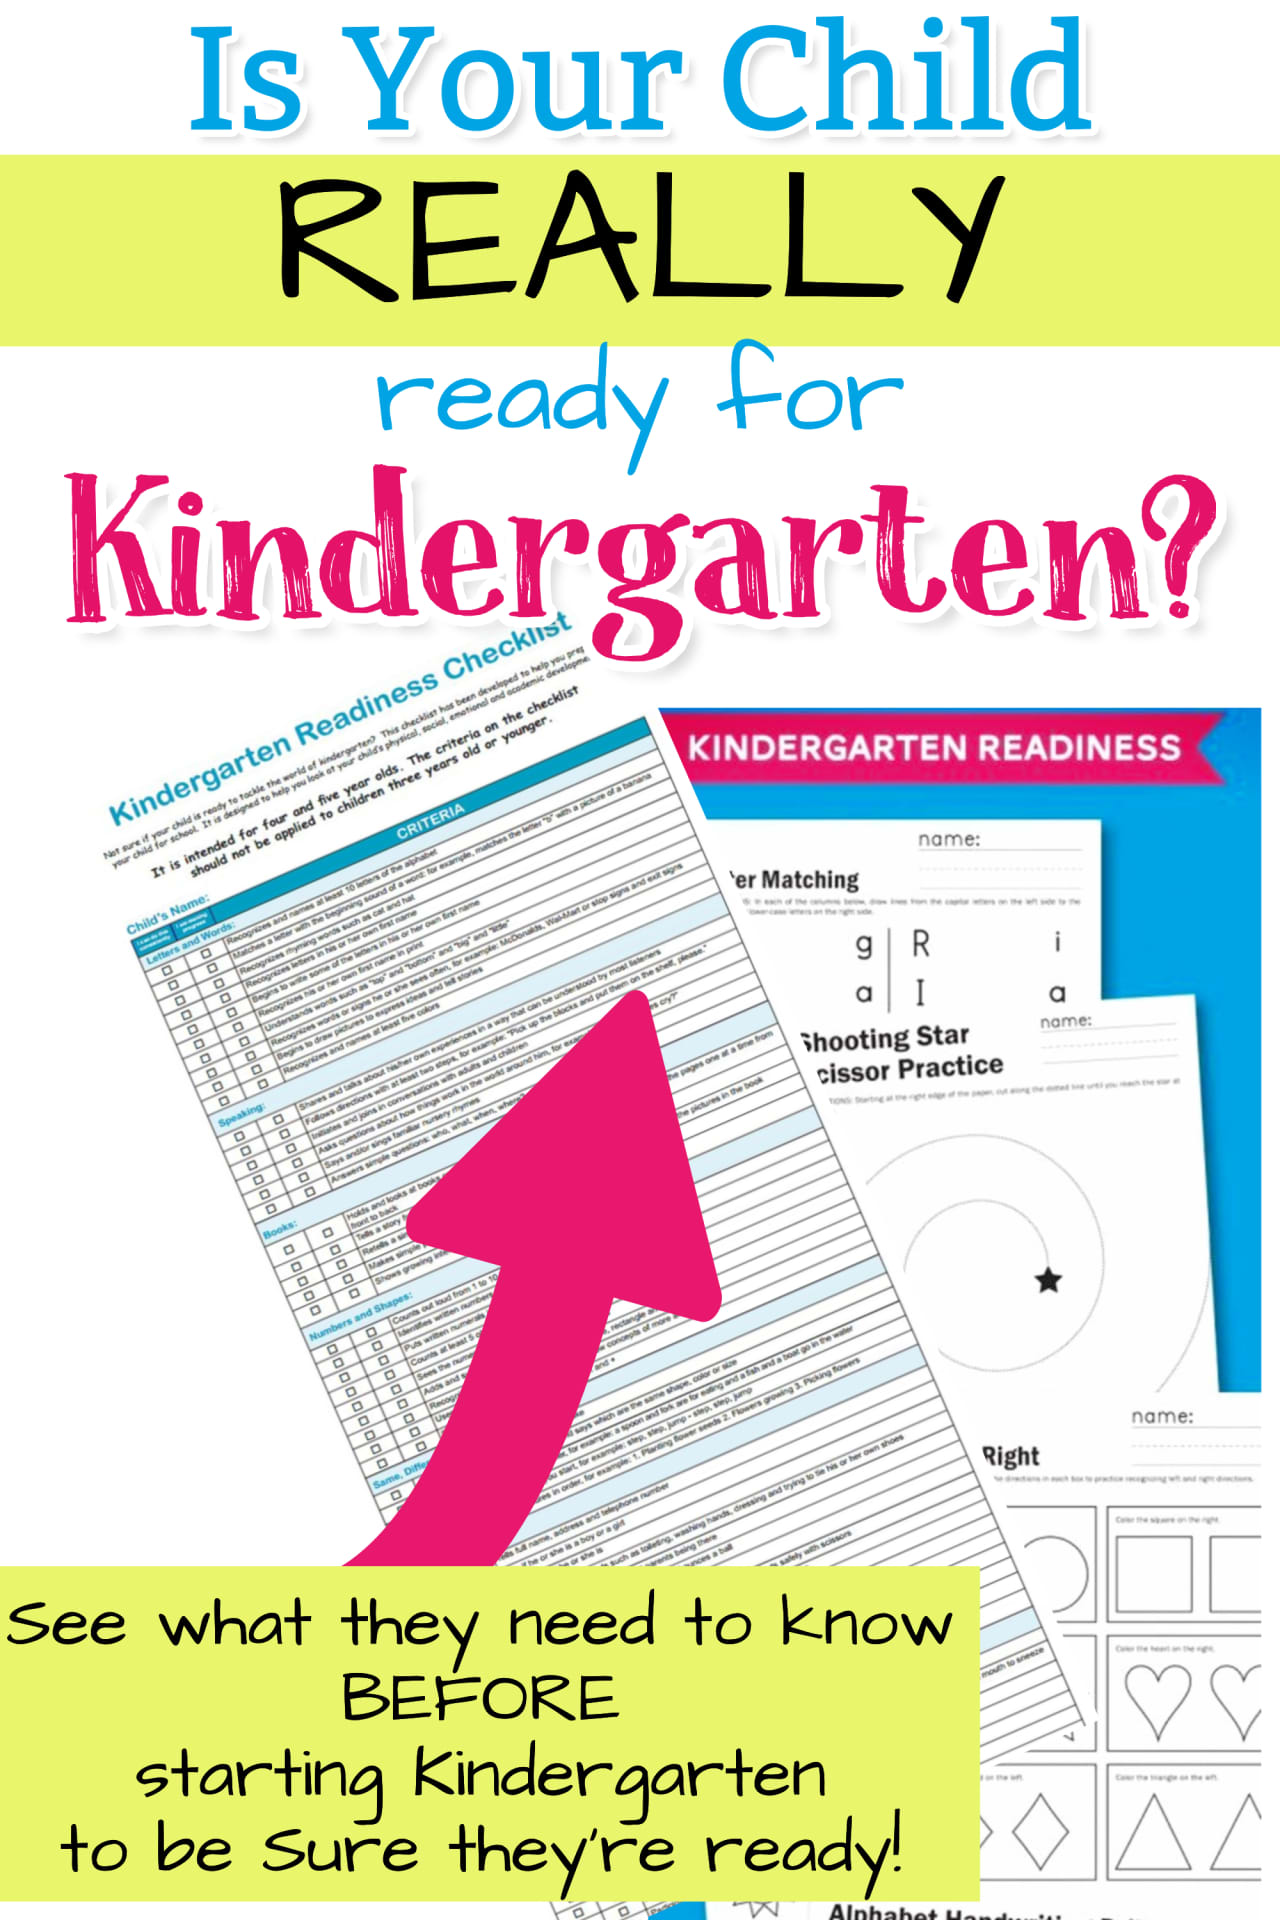 Kindergarten Readiness Checklists - free printable checklists for parents - Advice for Moms and Dads who have a child getting ready to start Kindergarten - Is your child REALLY prepared to start Kindergarten this school year?  See these Kindergarten Readiness checklists and worksheets to be SURE your child is set for success in Kindergarten.